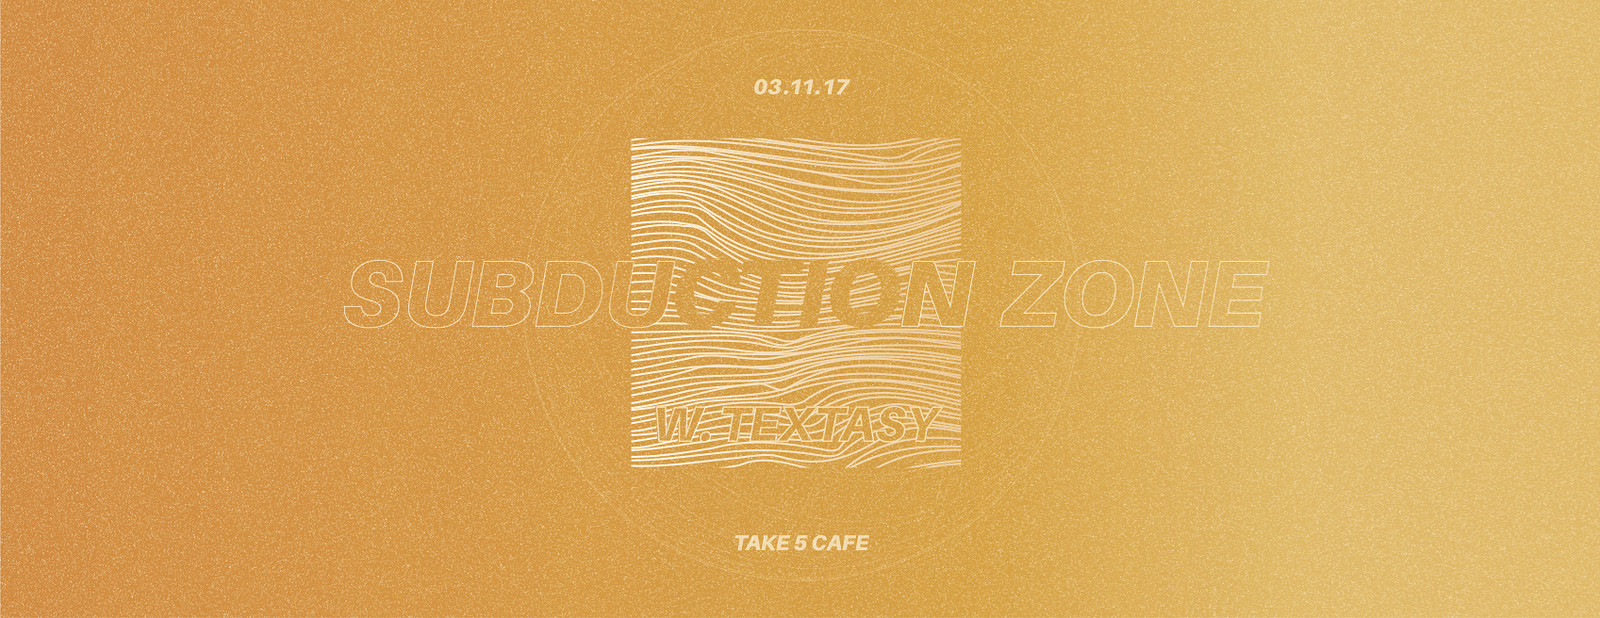 Subduction Zone at Take Five Cafe